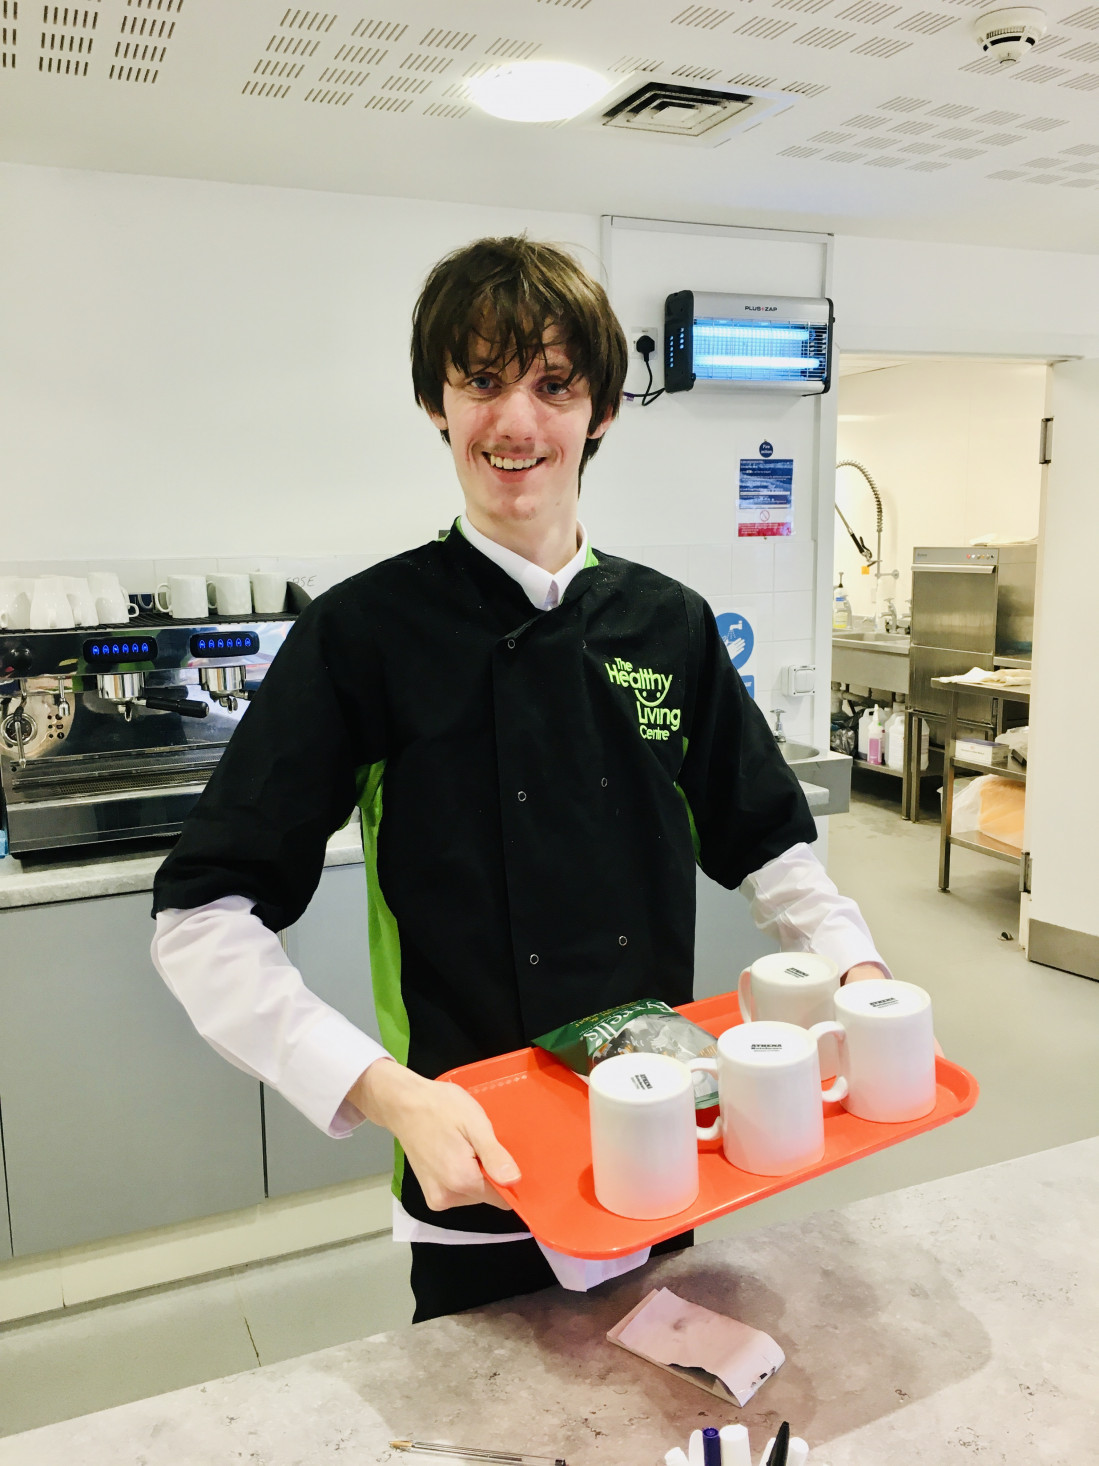 Lee's work experience at the Healthy Living Centre Community Café